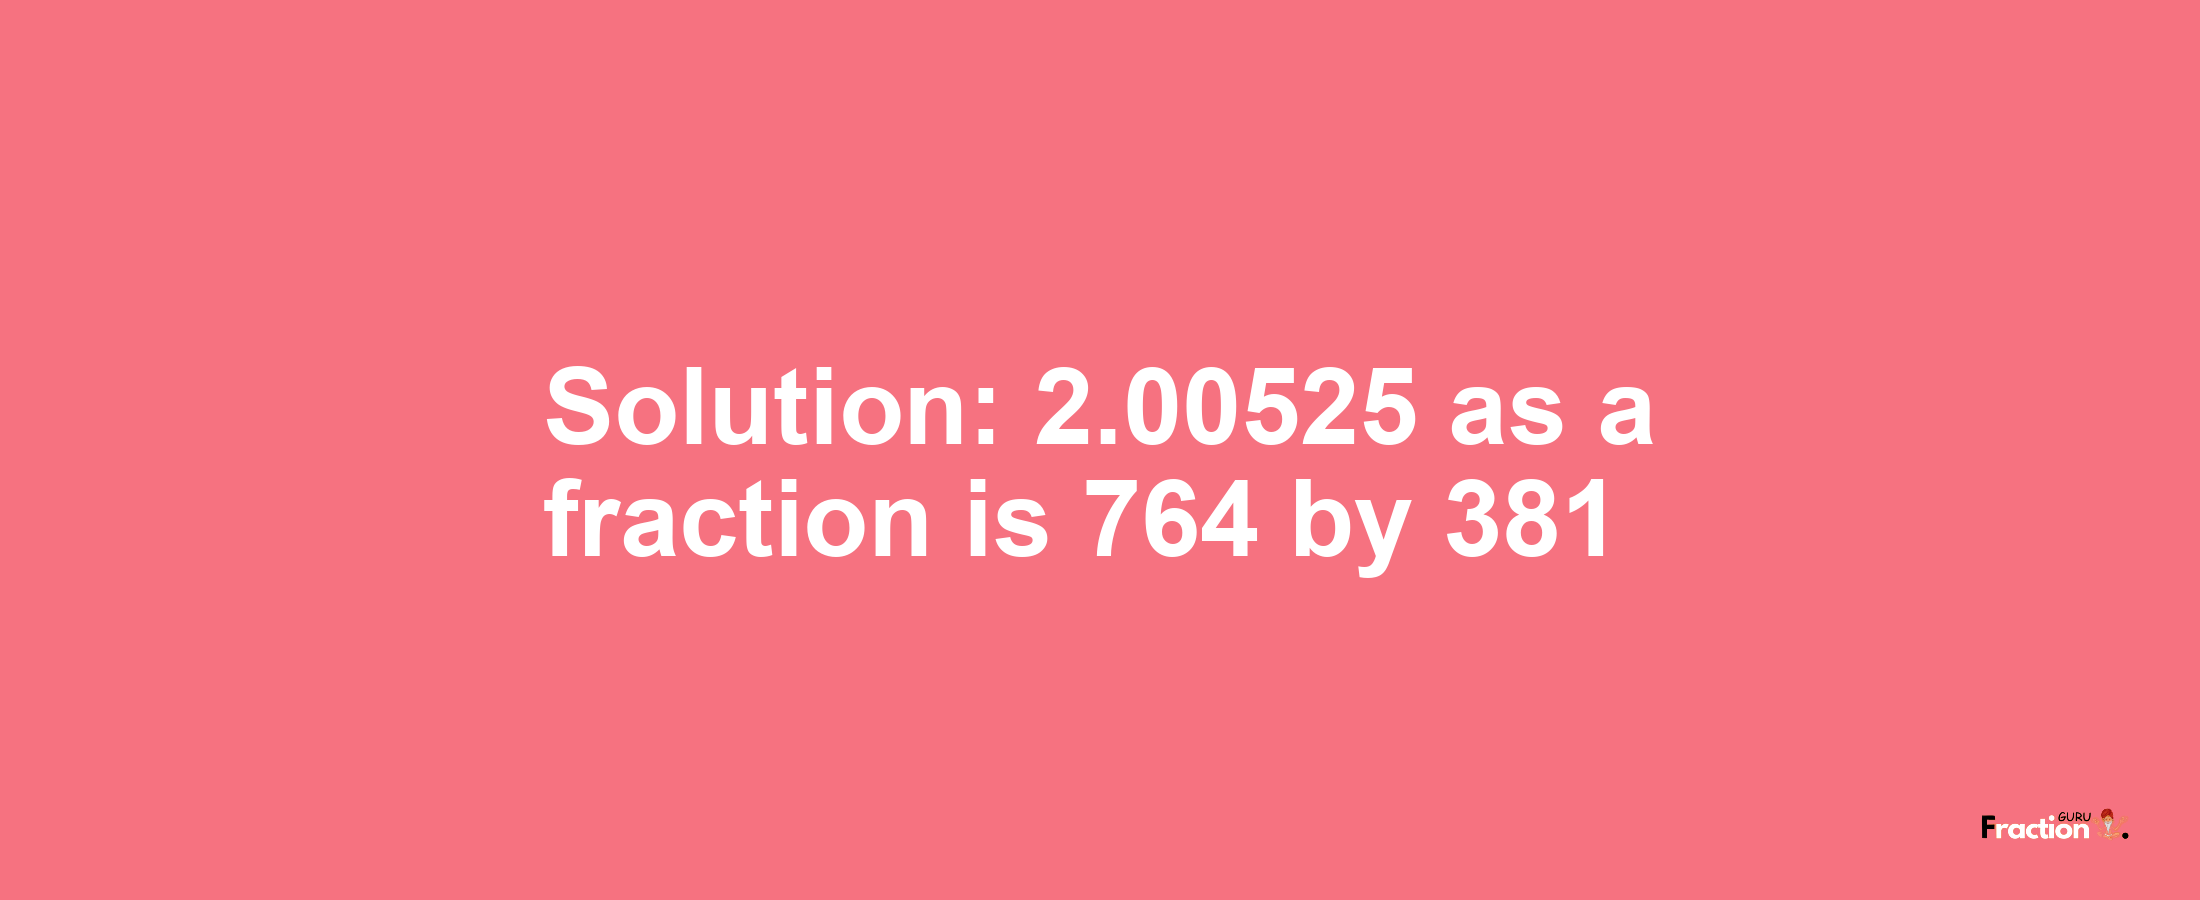 Solution:2.00525 as a fraction is 764/381